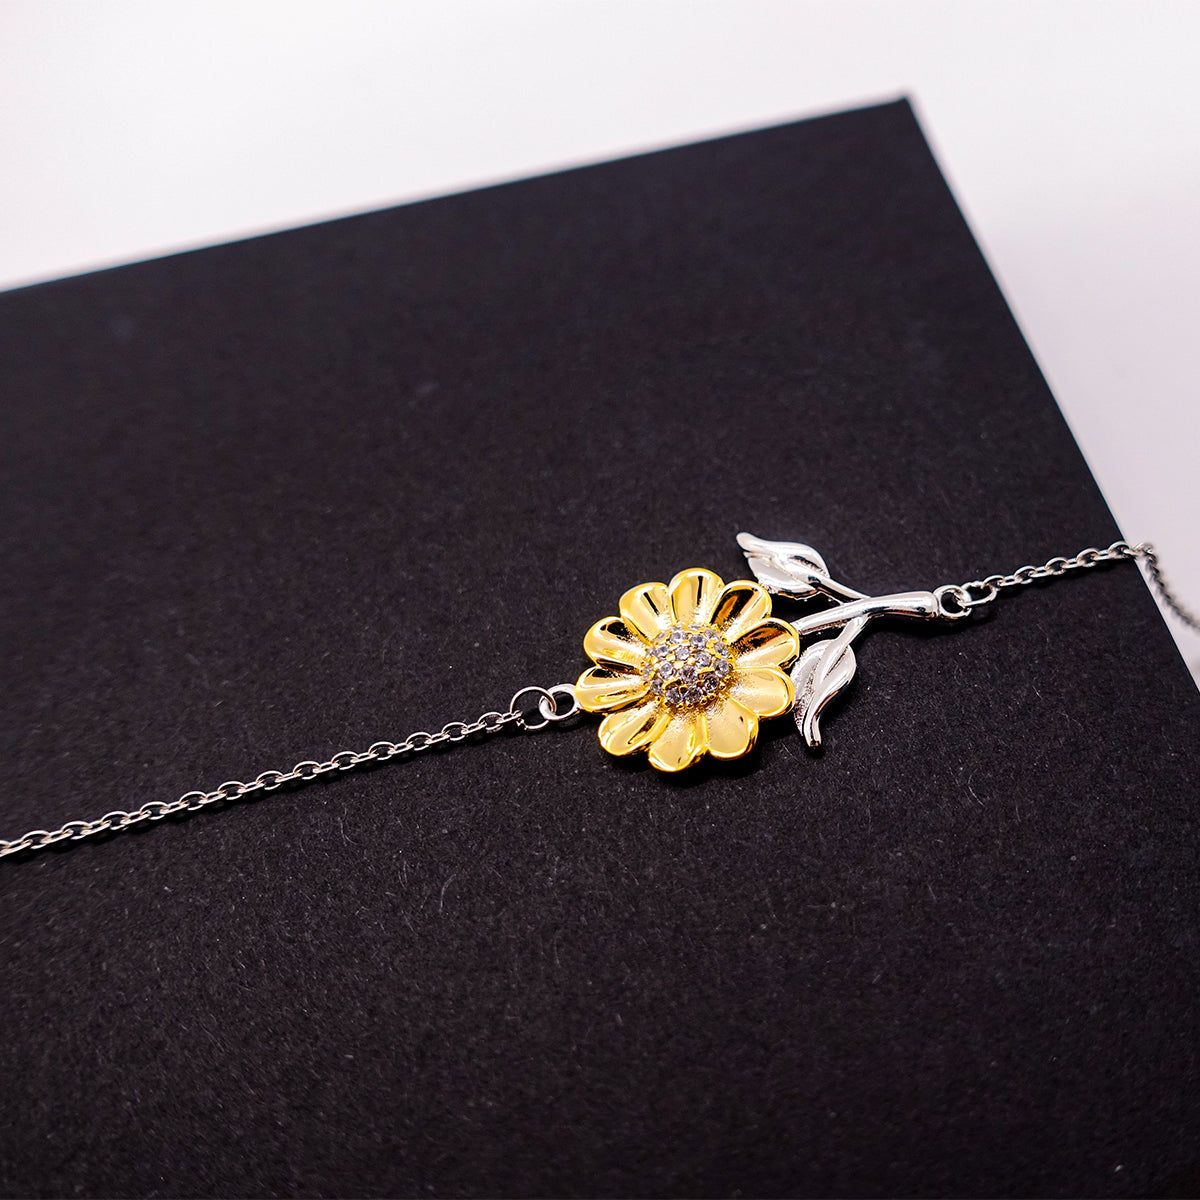 Special Place in My Heart Sunflower Bracelet for Brother-In-Law, Unique Engraved Gift for Christmas, Birthday, and Graduation